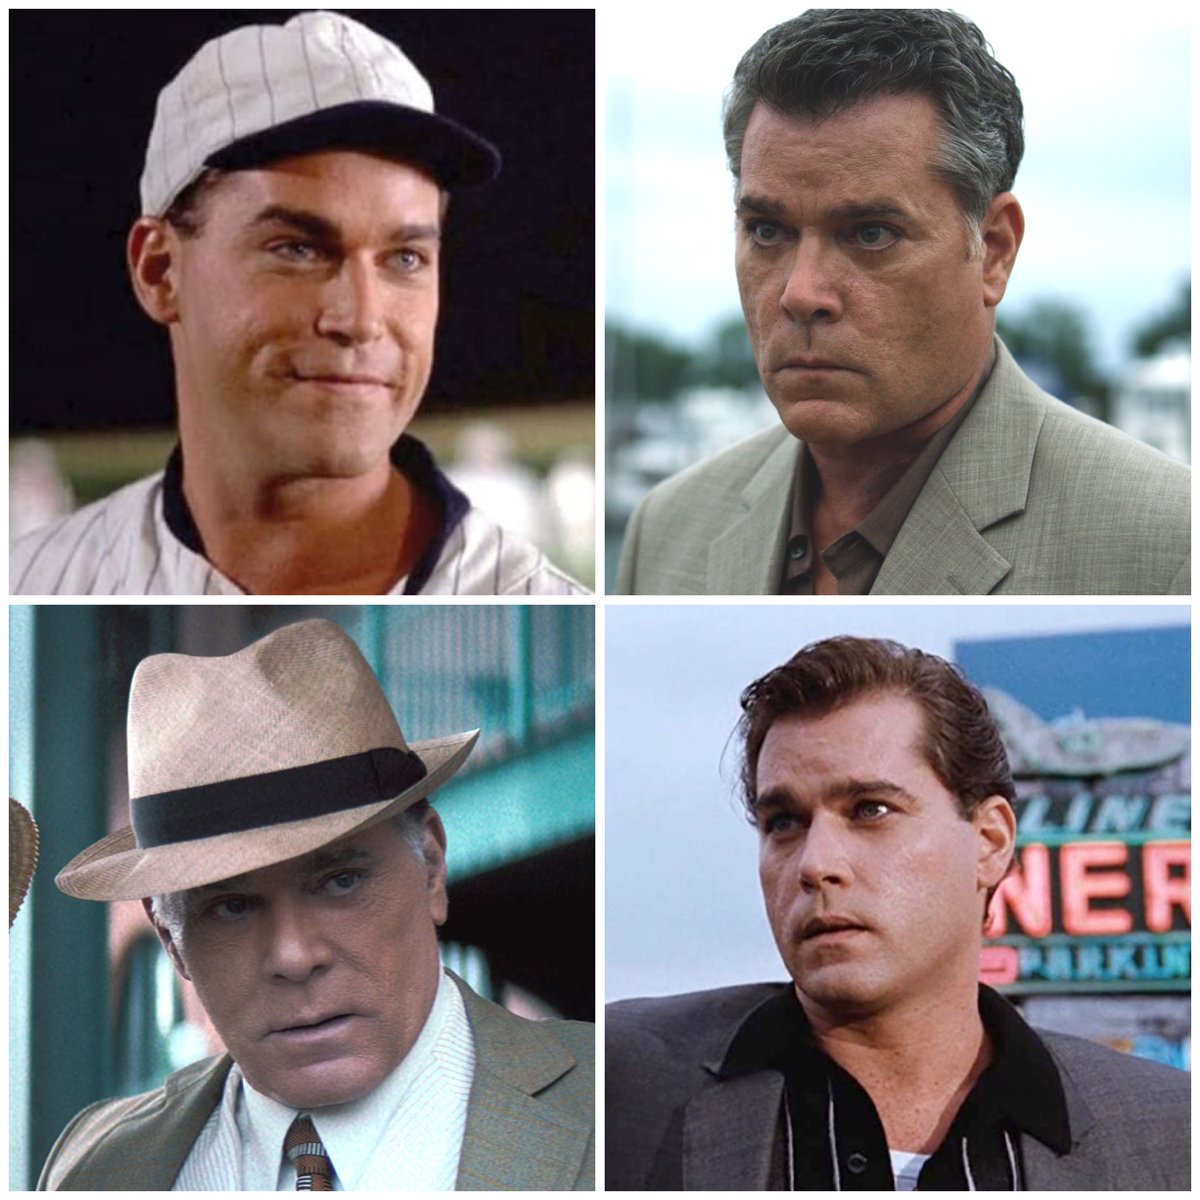 Happy birthday to Ray Liotta🎂 

The actor would have turned 69 today.

#RayLiotta